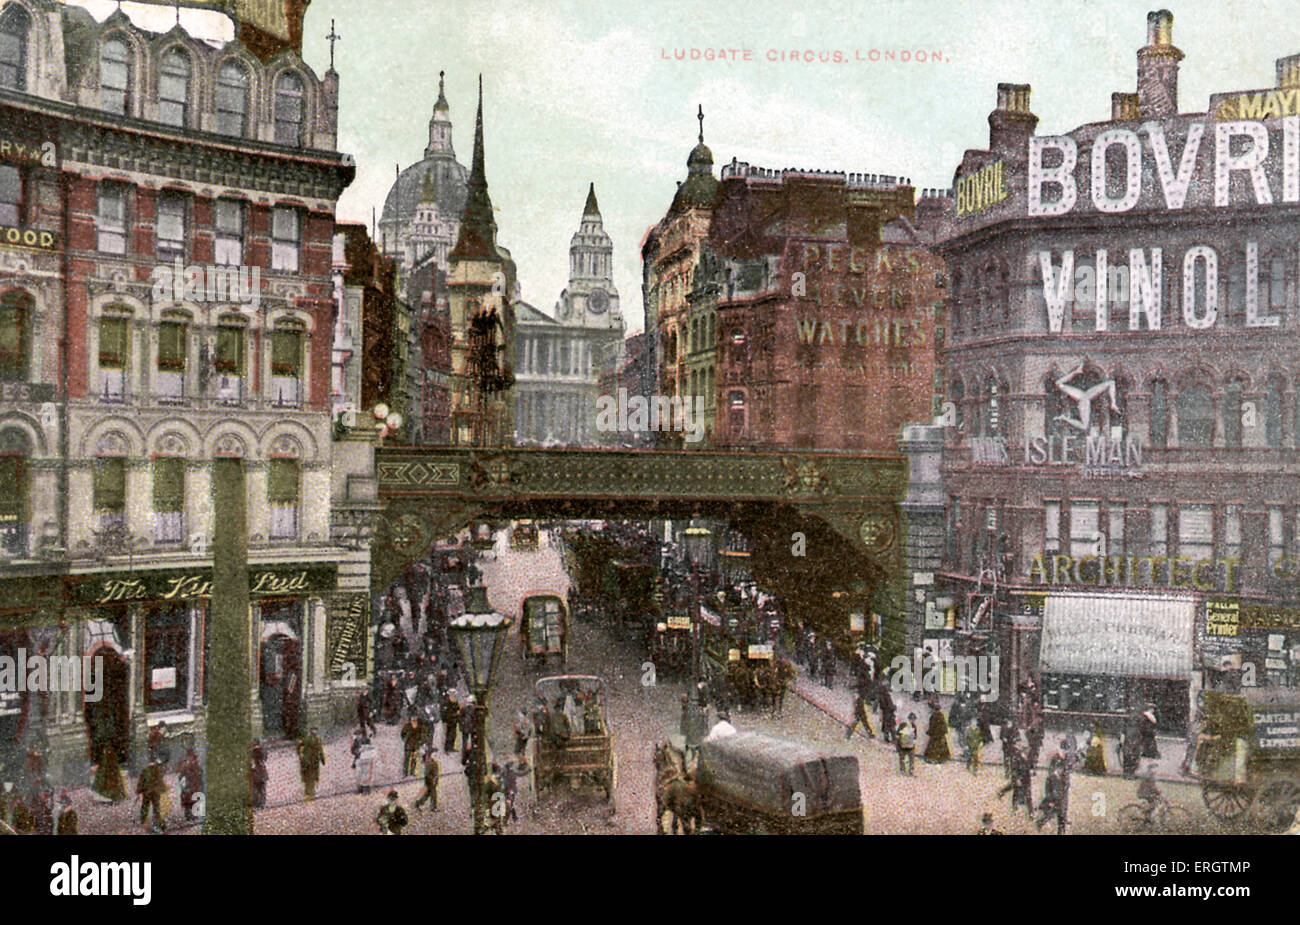 London - Ludgate Hill in the City of London. Pedestrians and horse - drawn carriages. Early 20th century. Stock Photo